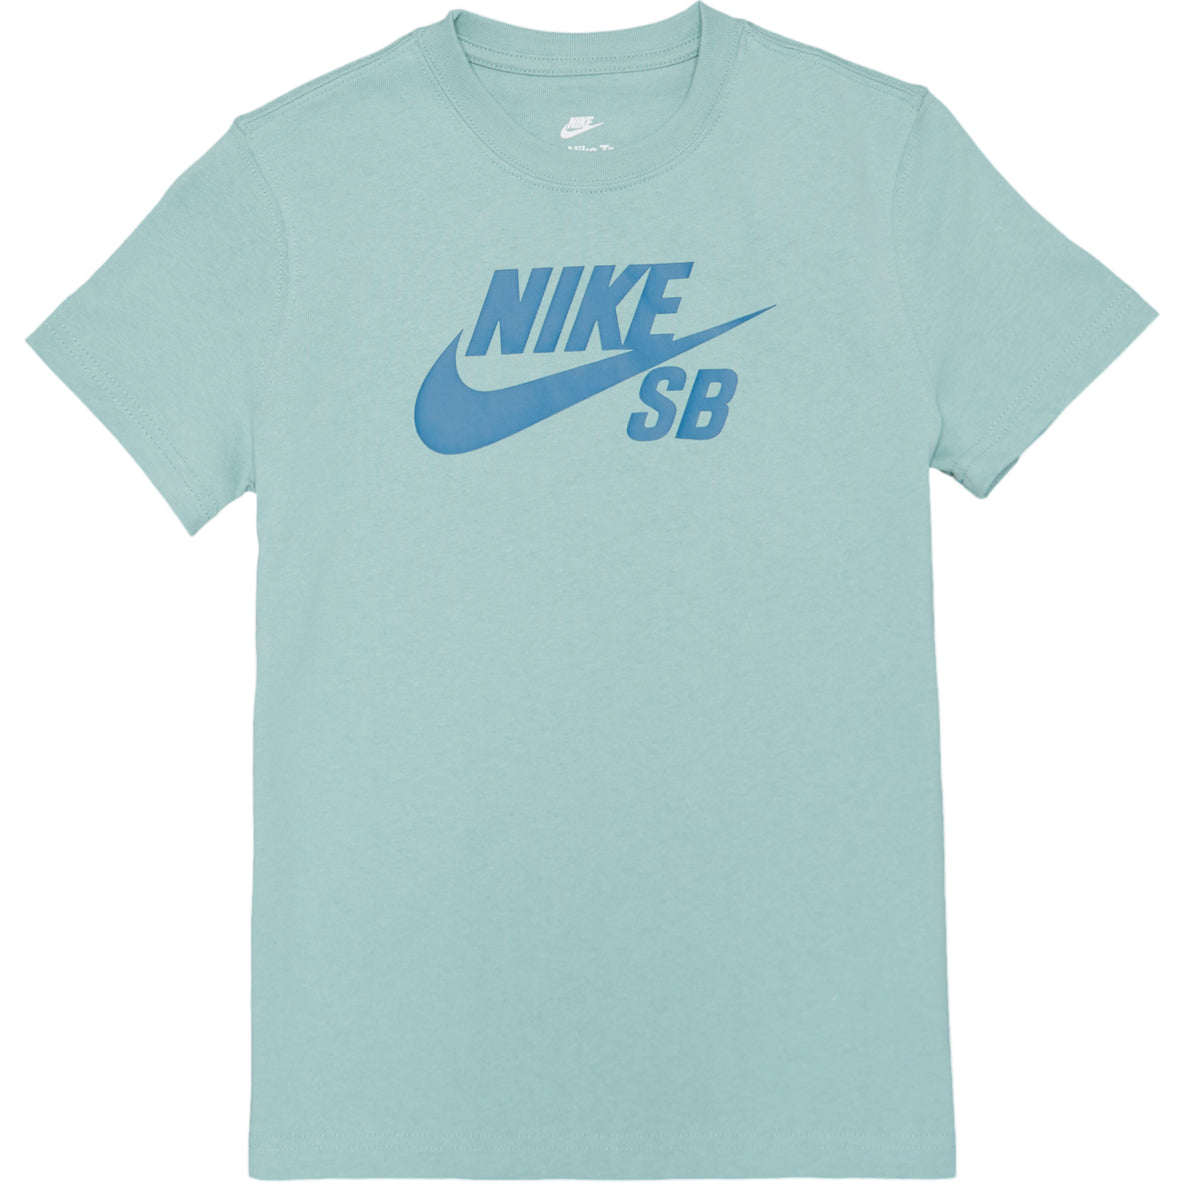 Nike SB Youth Icon T-Shirt - Mineral image 1